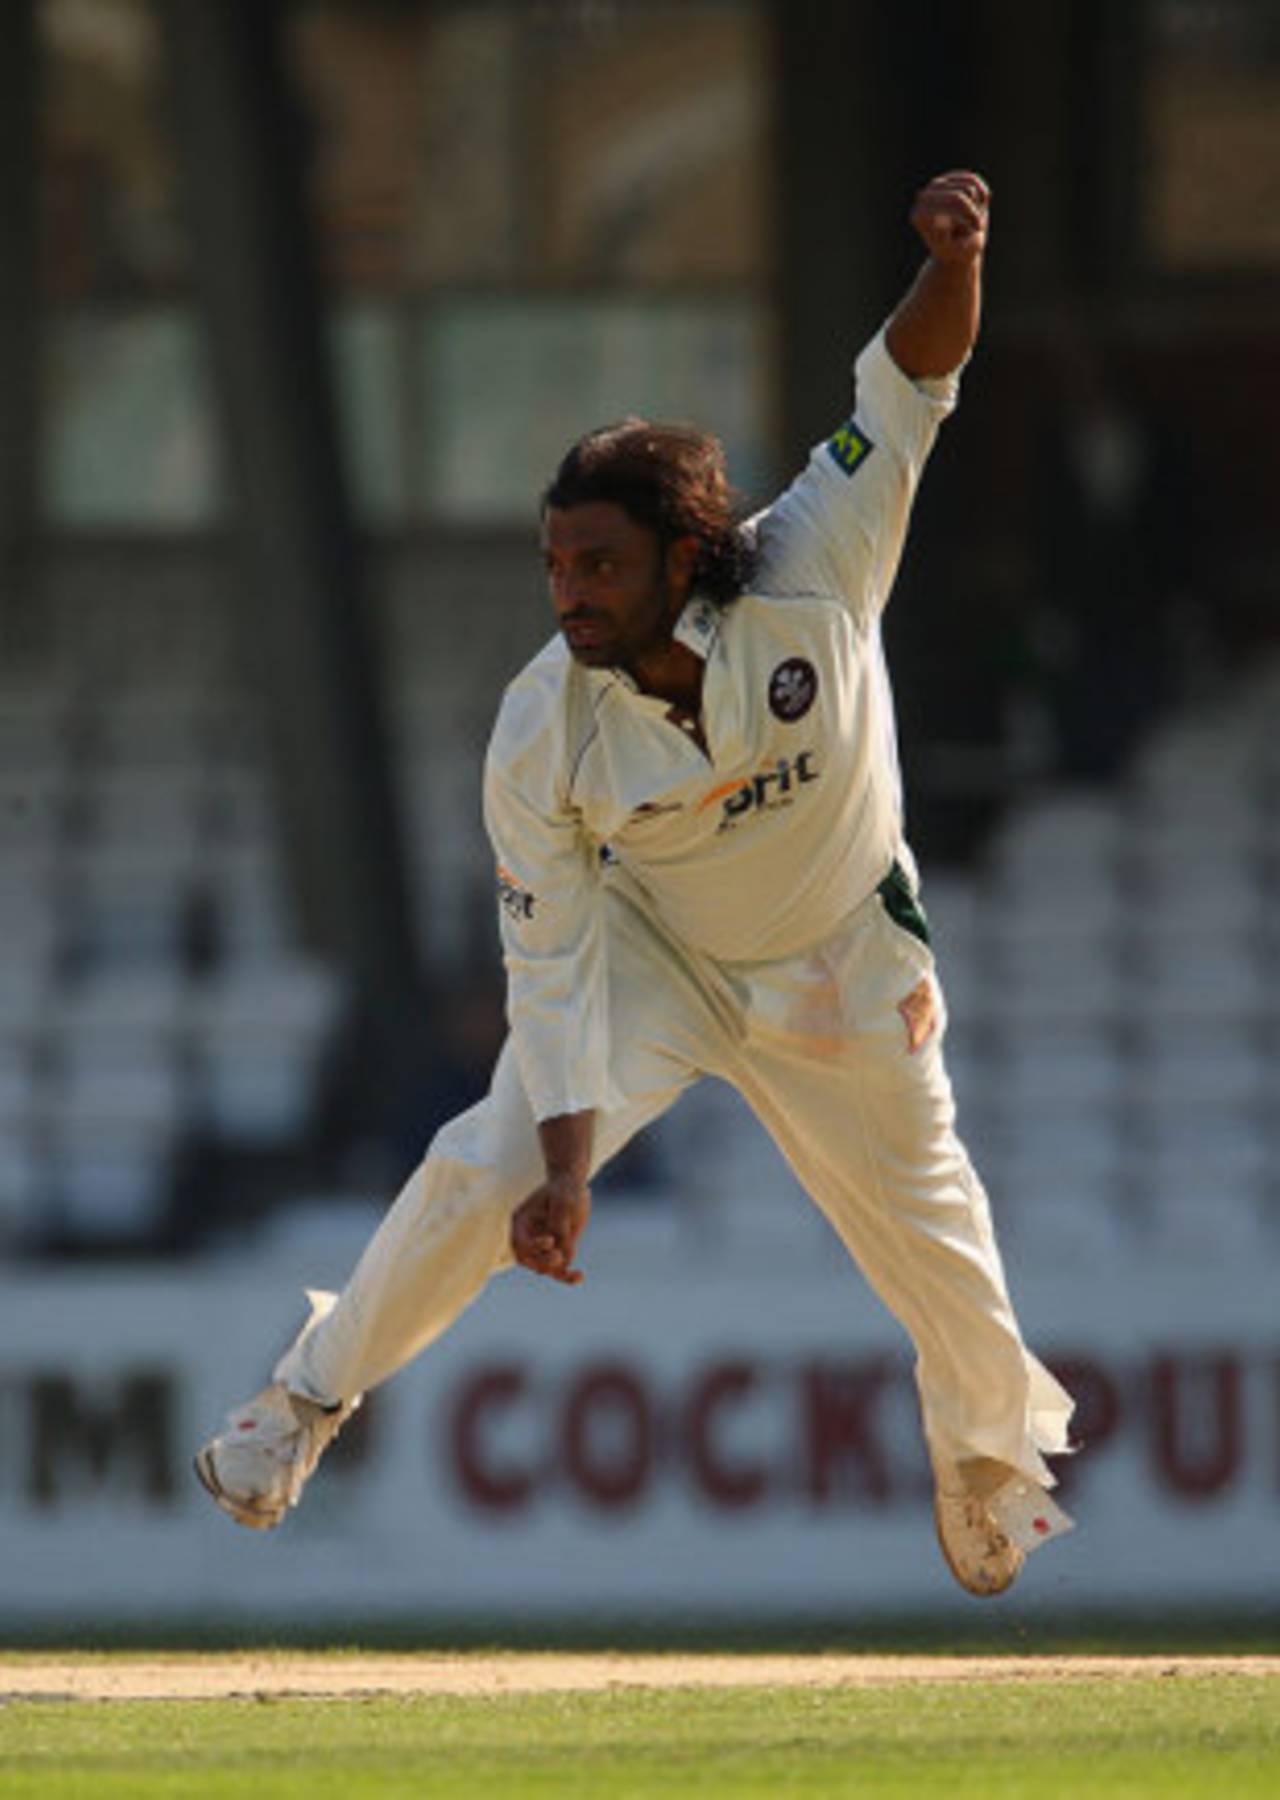 Shoaib Akhtar goes airborne (but wicketless), Surrey v Nottinghamshire, The Oval, September 19, 2008